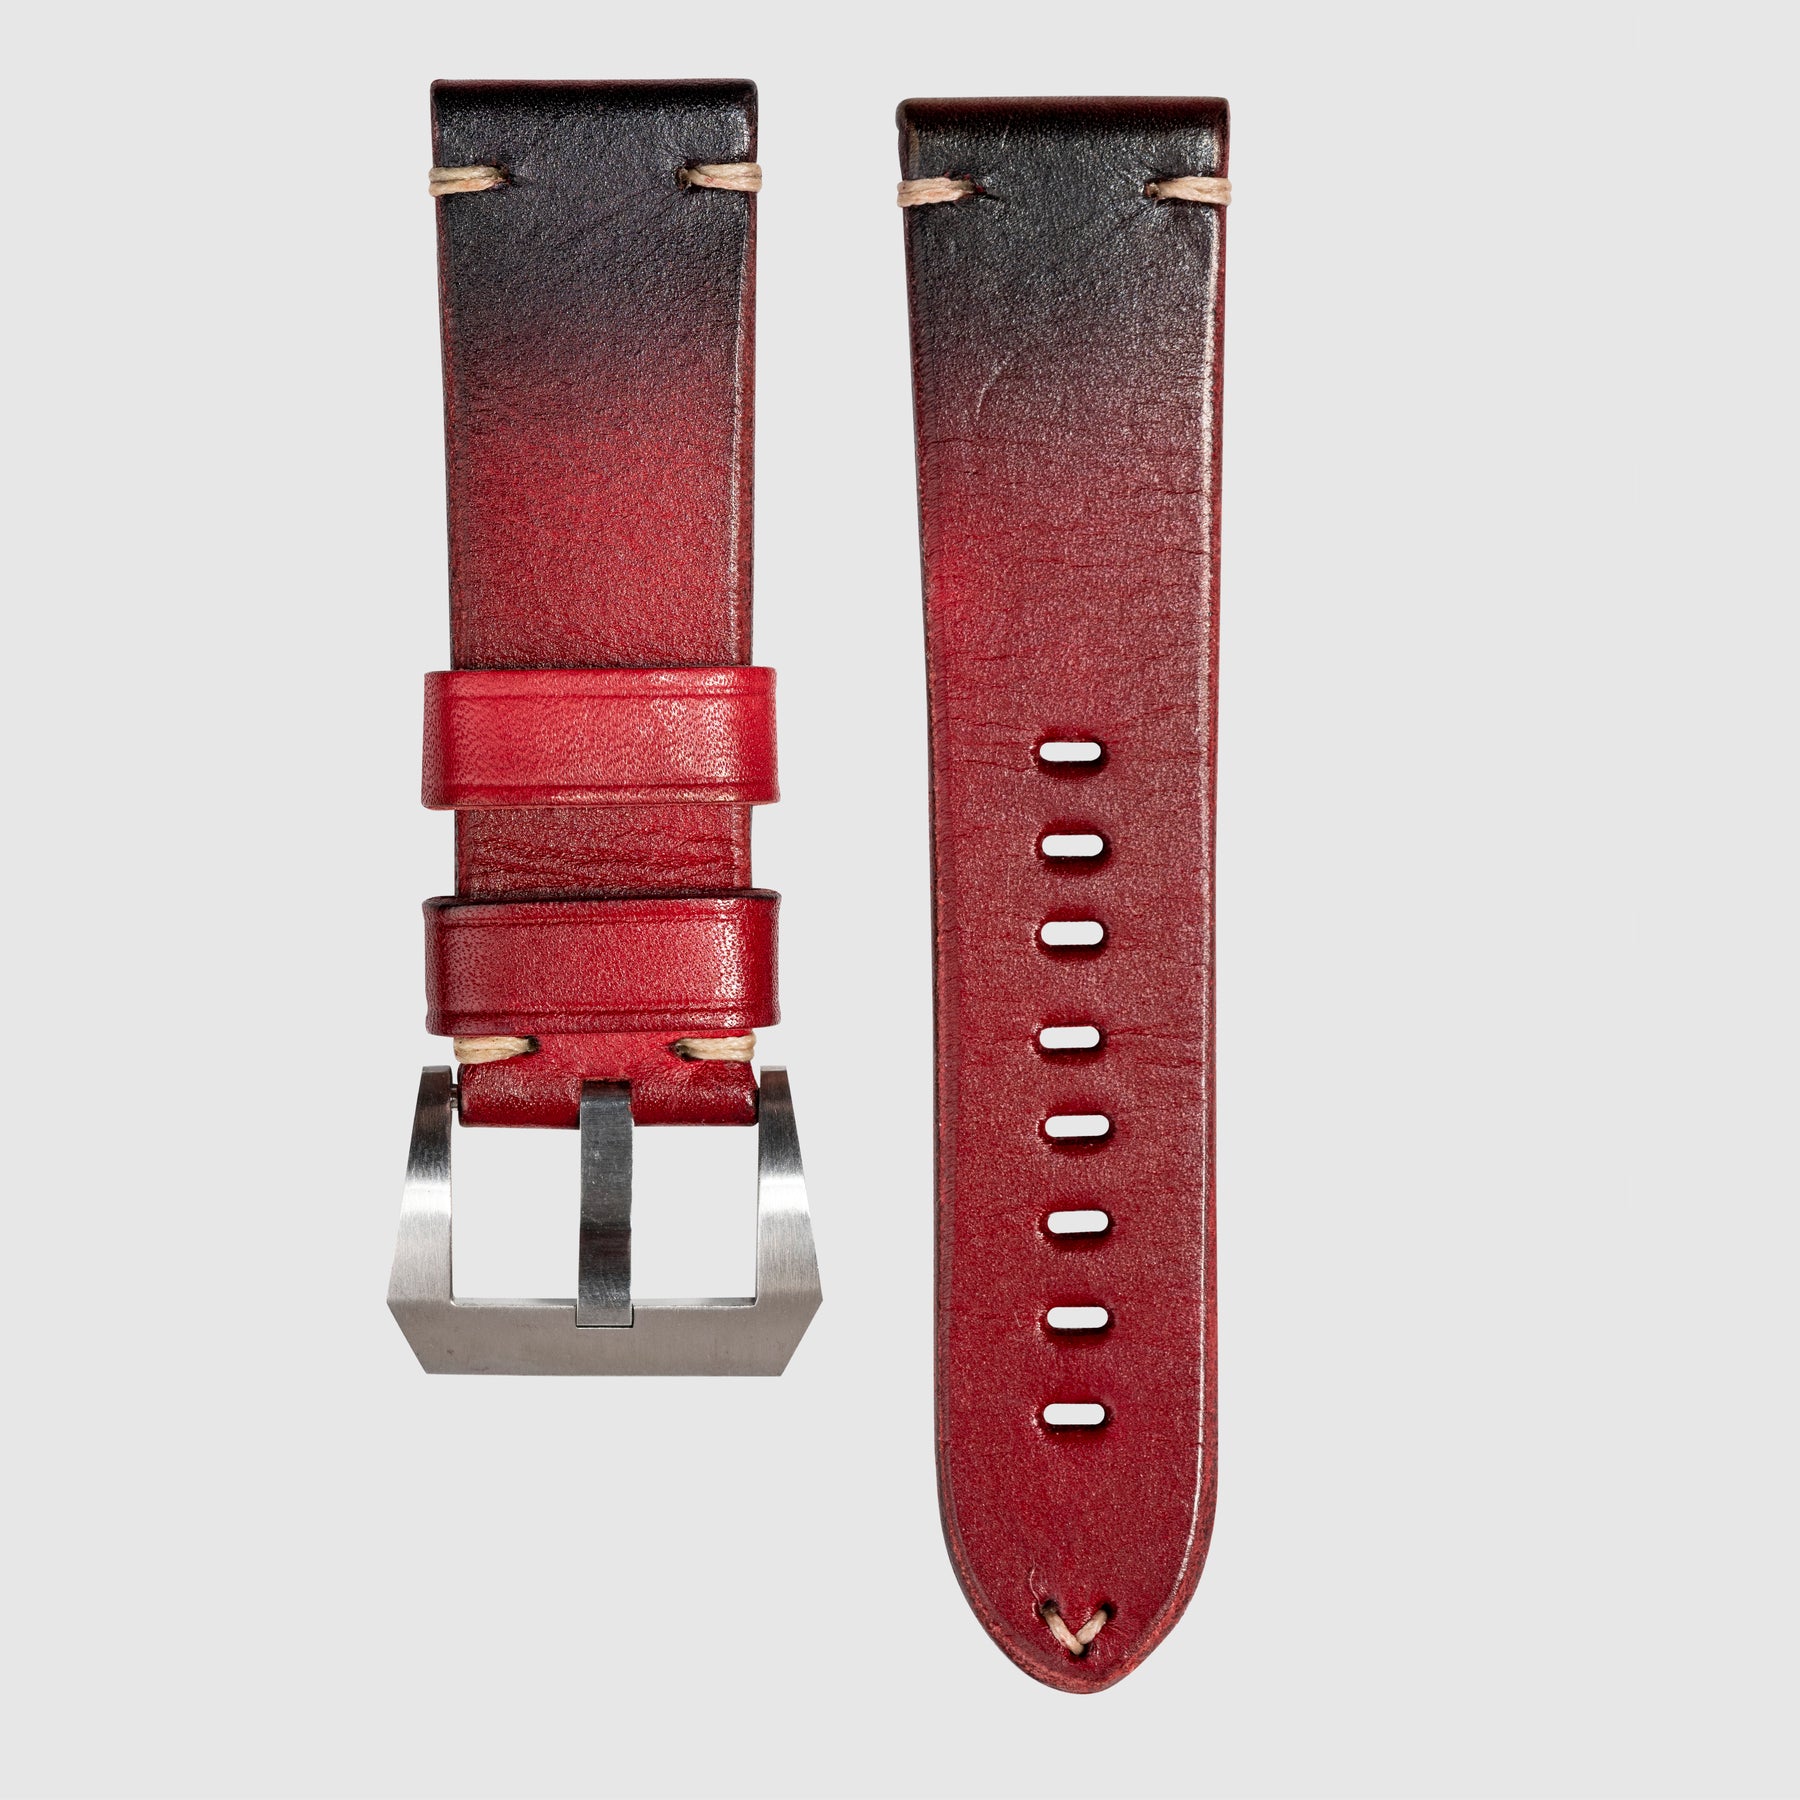 Vintage Strap - Berluti style Red - Calf Leather (Multiple Sizes)